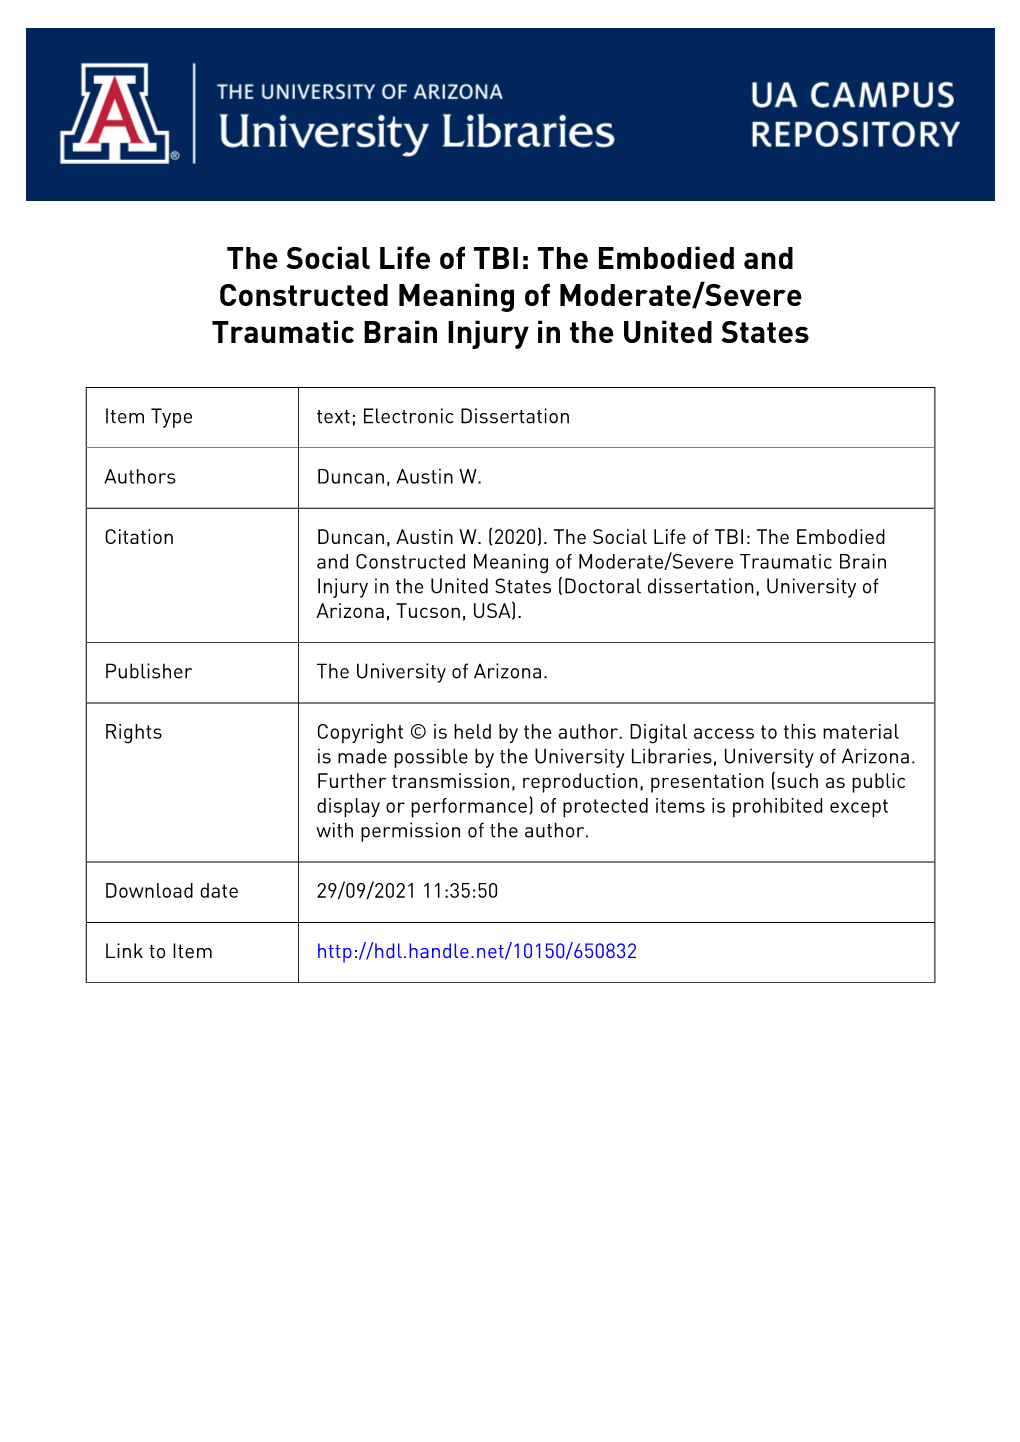 The Social Life of TBI: the Embodied and Constructed Meaning of Moderate/Severe Traumatic Brain Injury in the United States